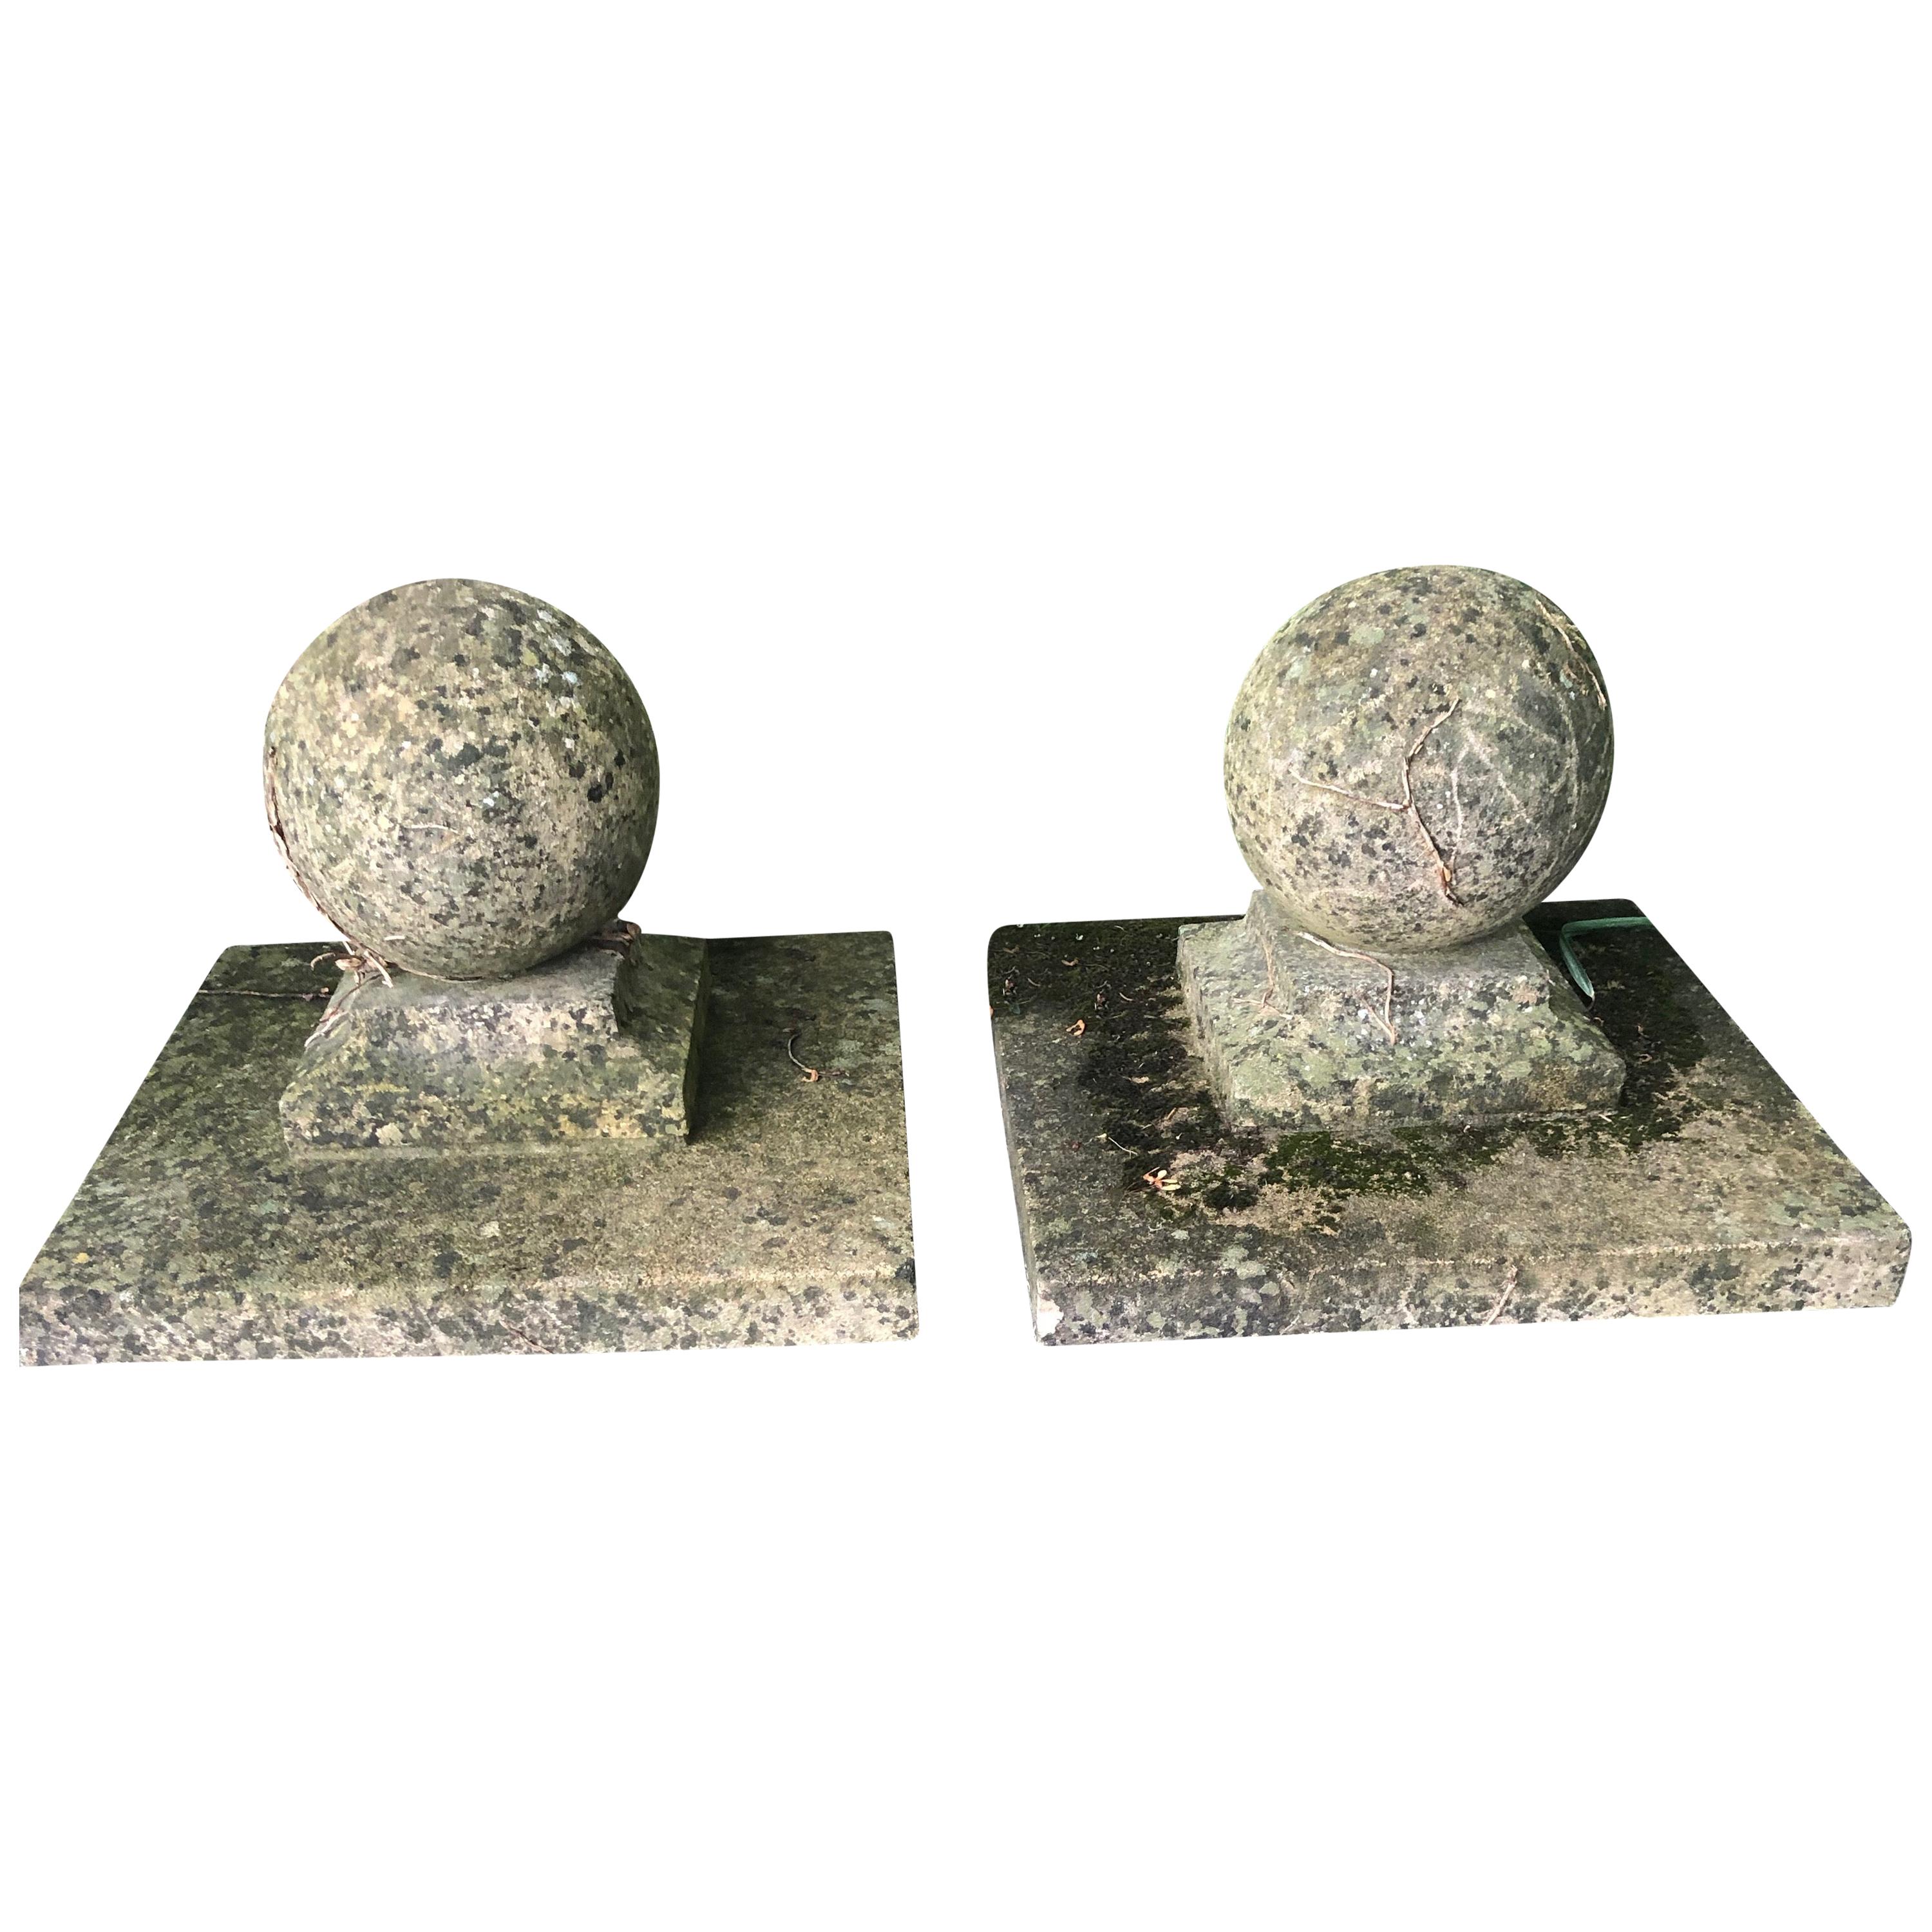 Pair of Large English Cast Stone Ball Gate Pier Finials #2